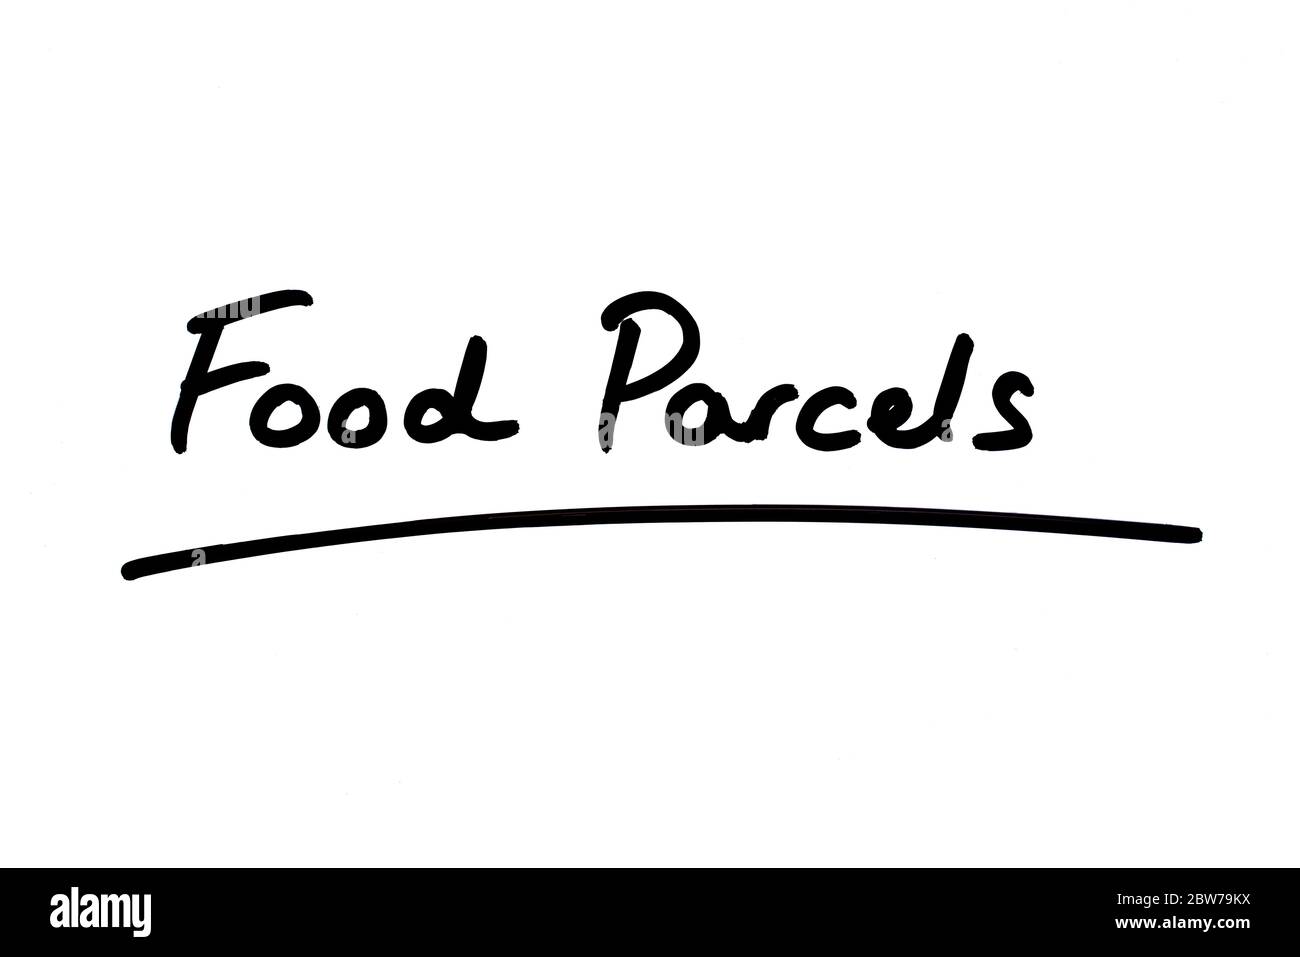 Food Parcels handwritten on a white background. Stock Photo